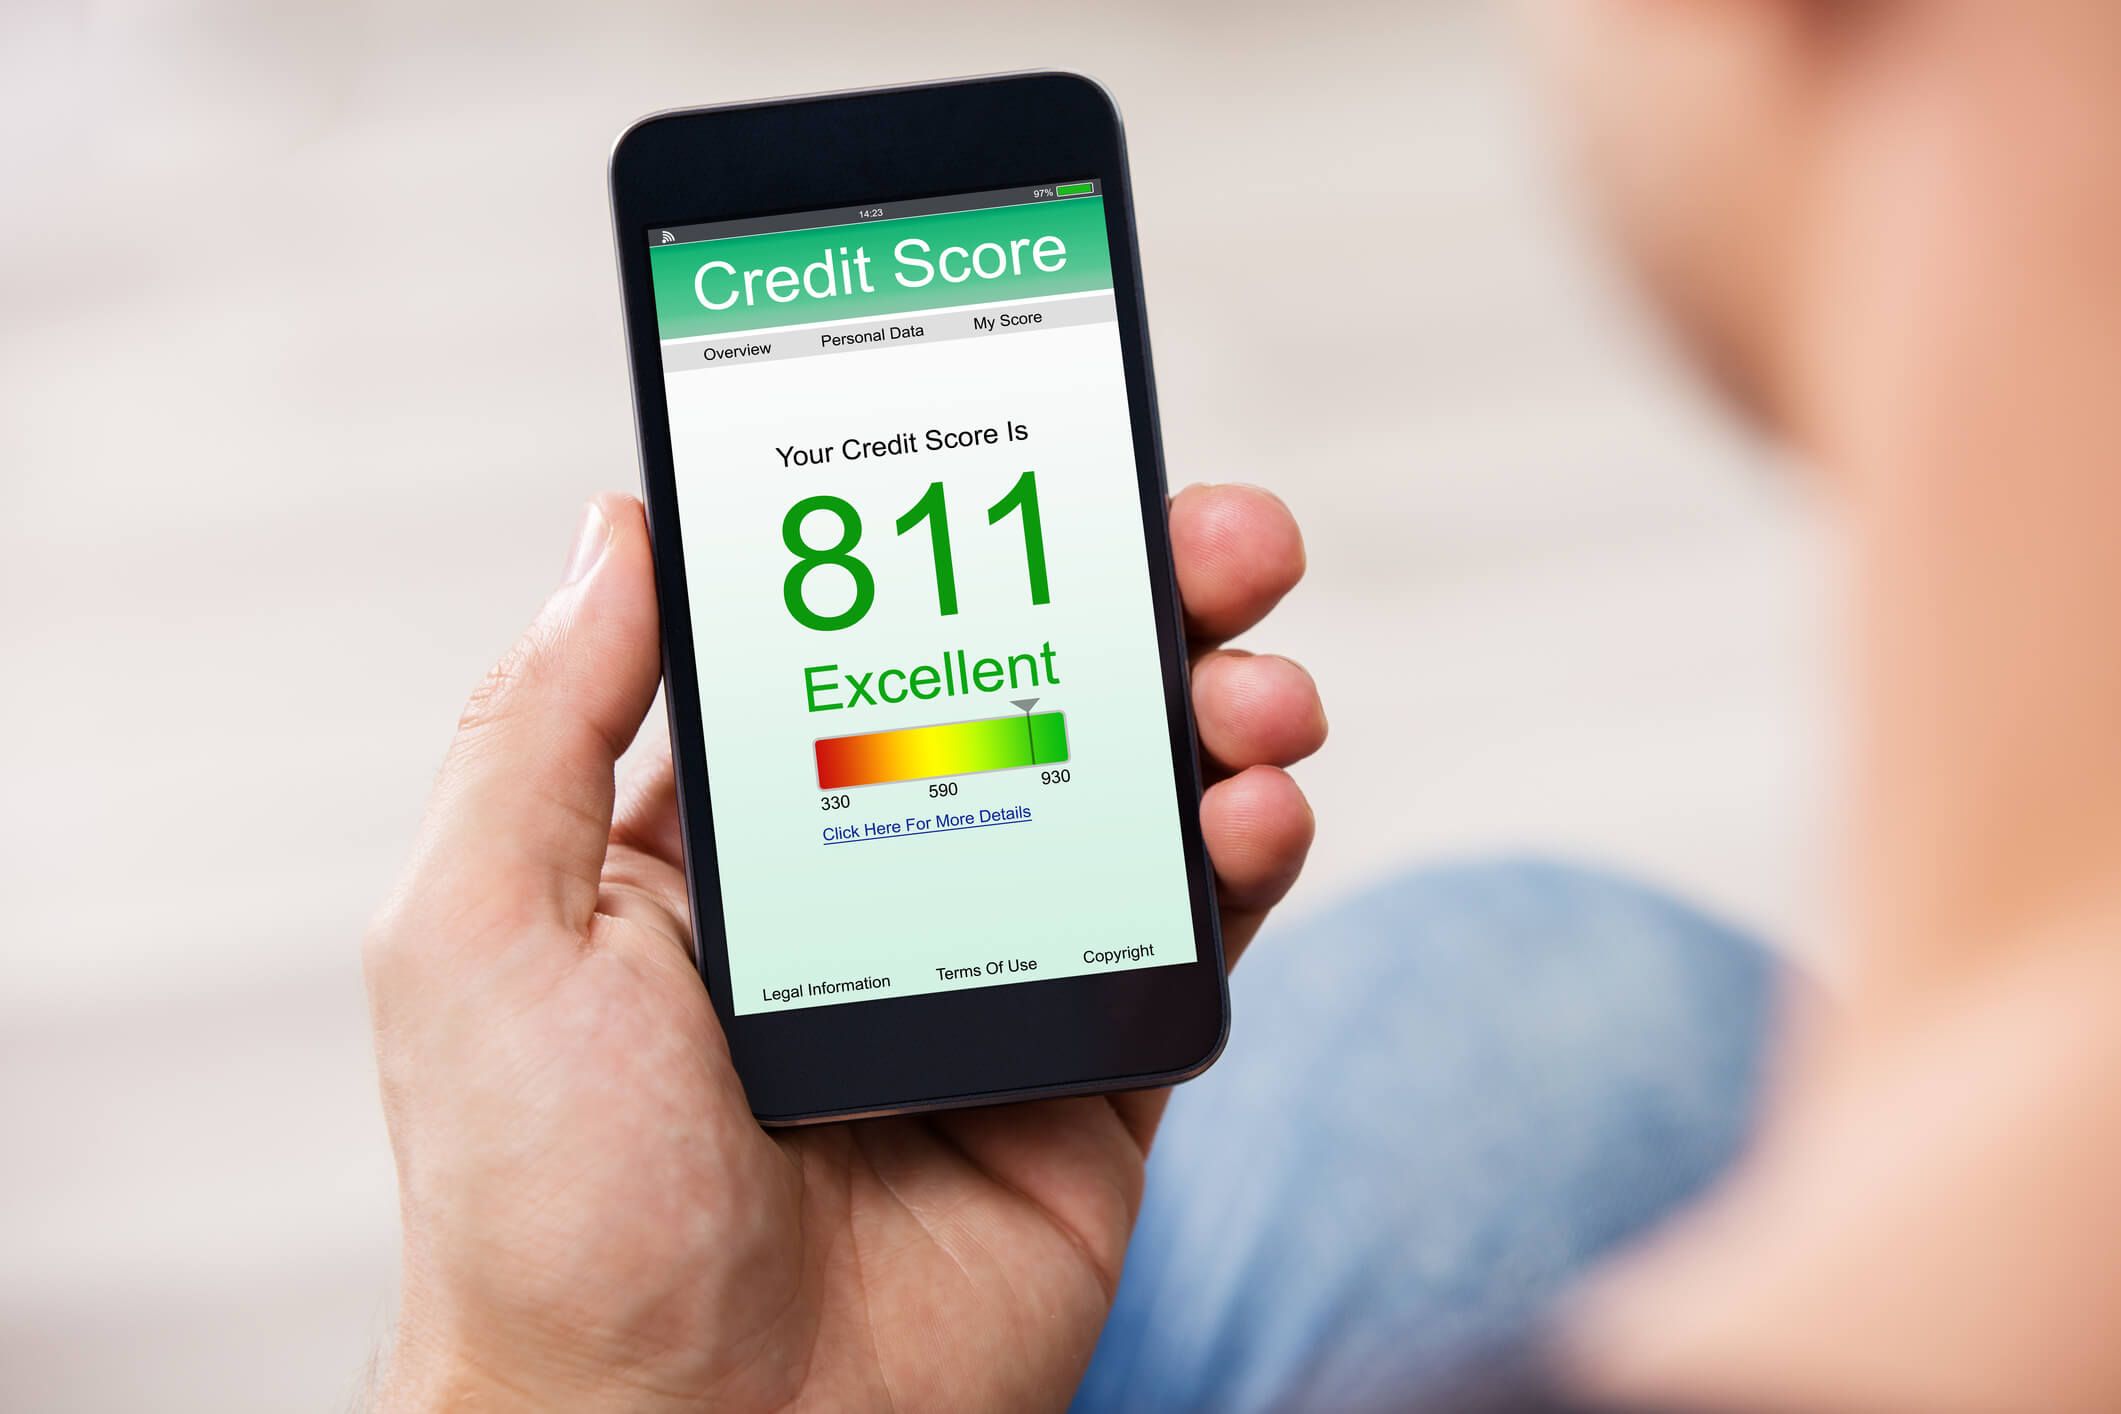 man holding a phone in his hand with his credit score on the screen, the credit score is 811